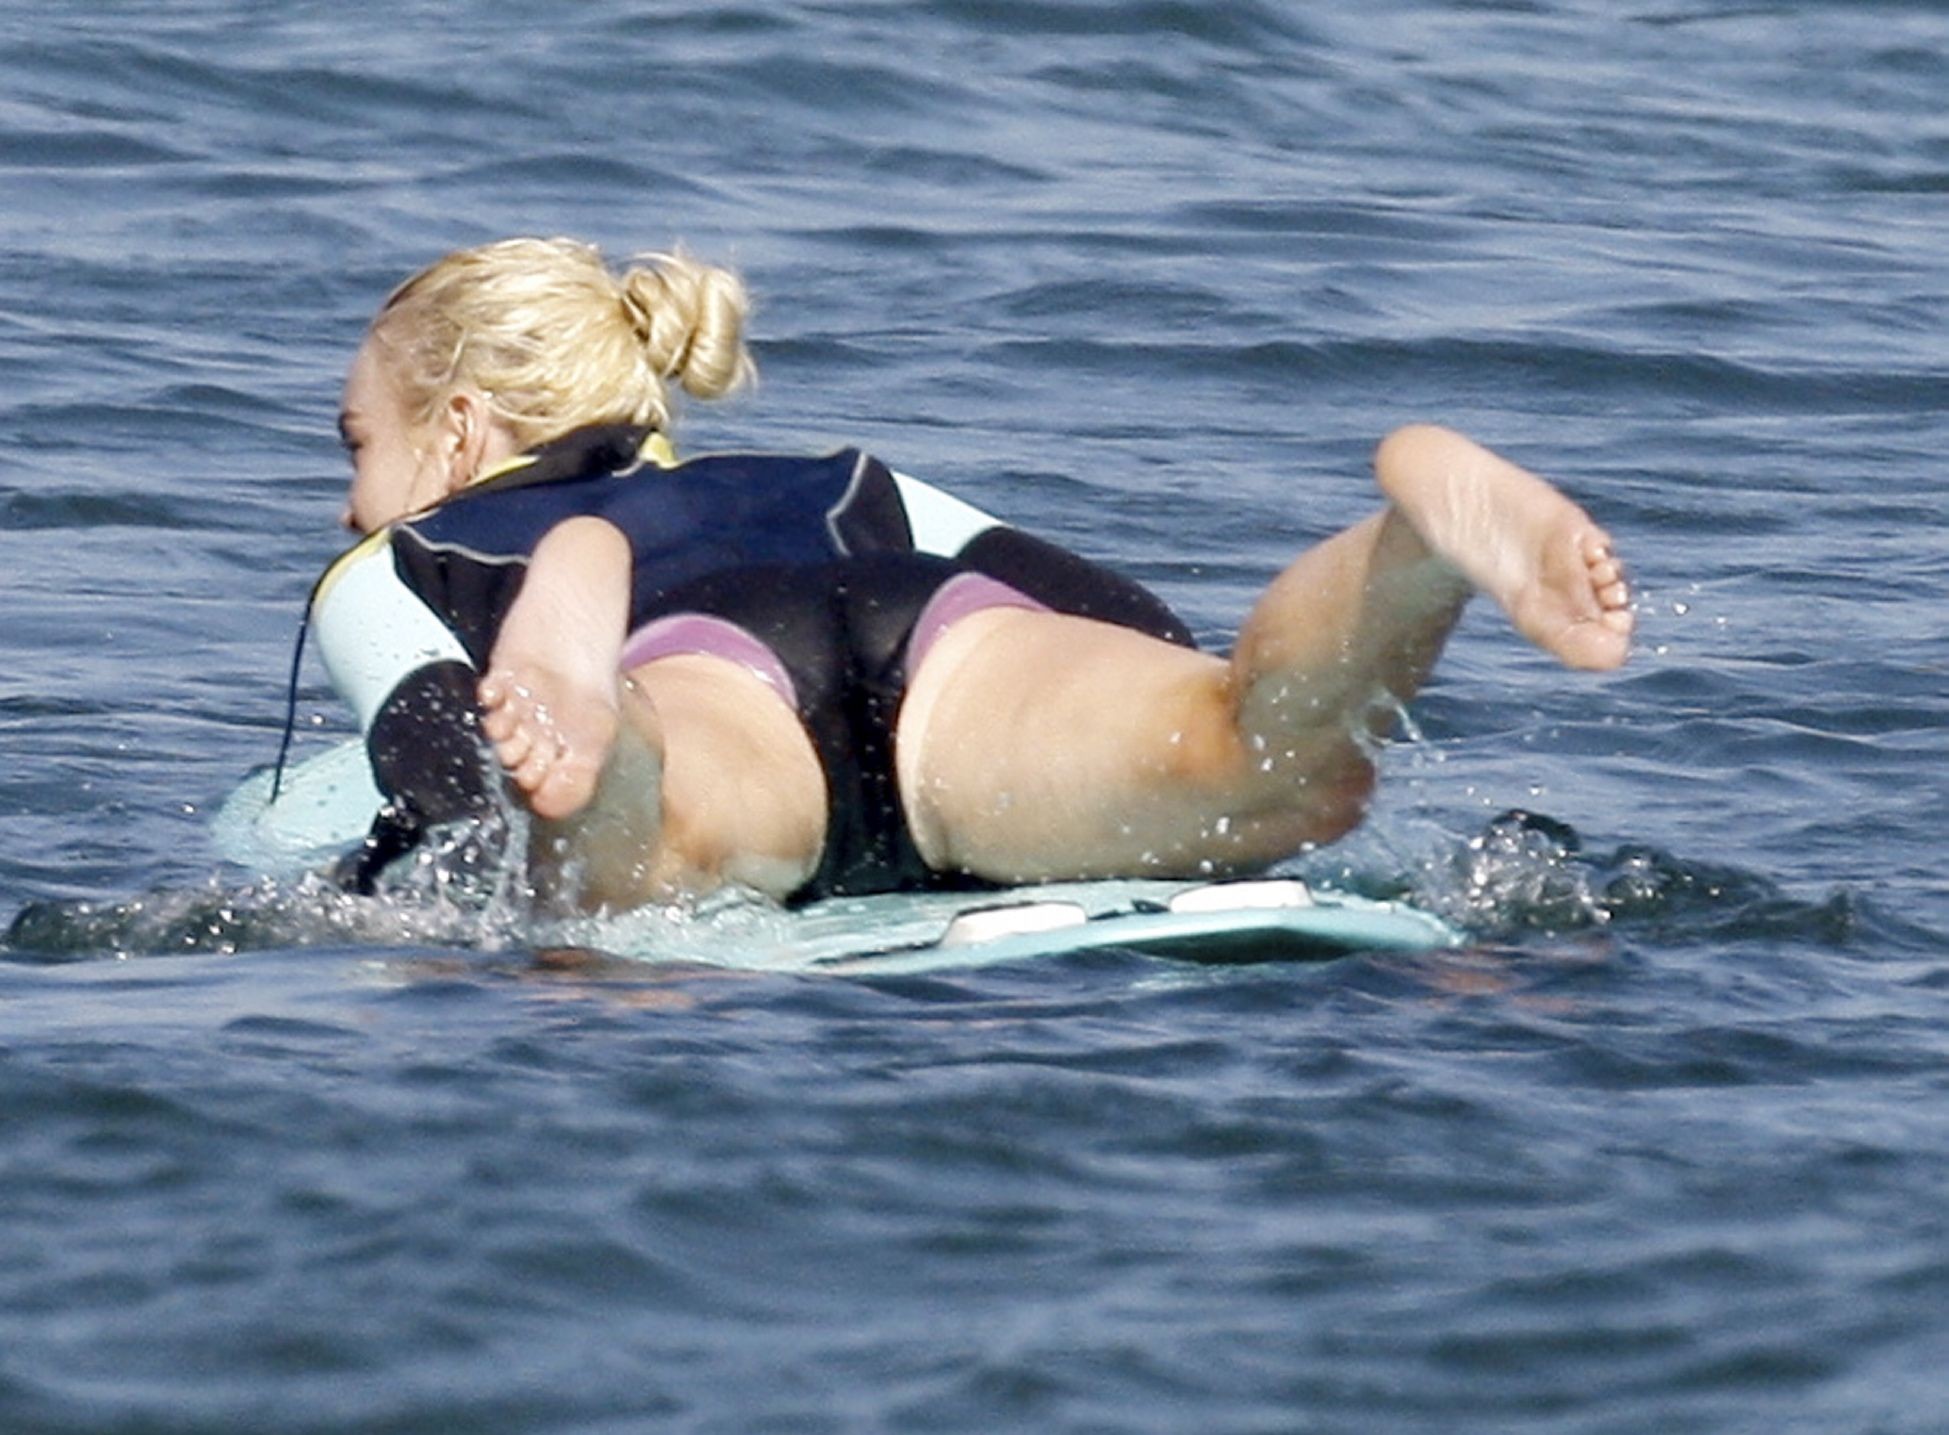 Lindsay Lohan shows off her ass while  after surfing in Malibu